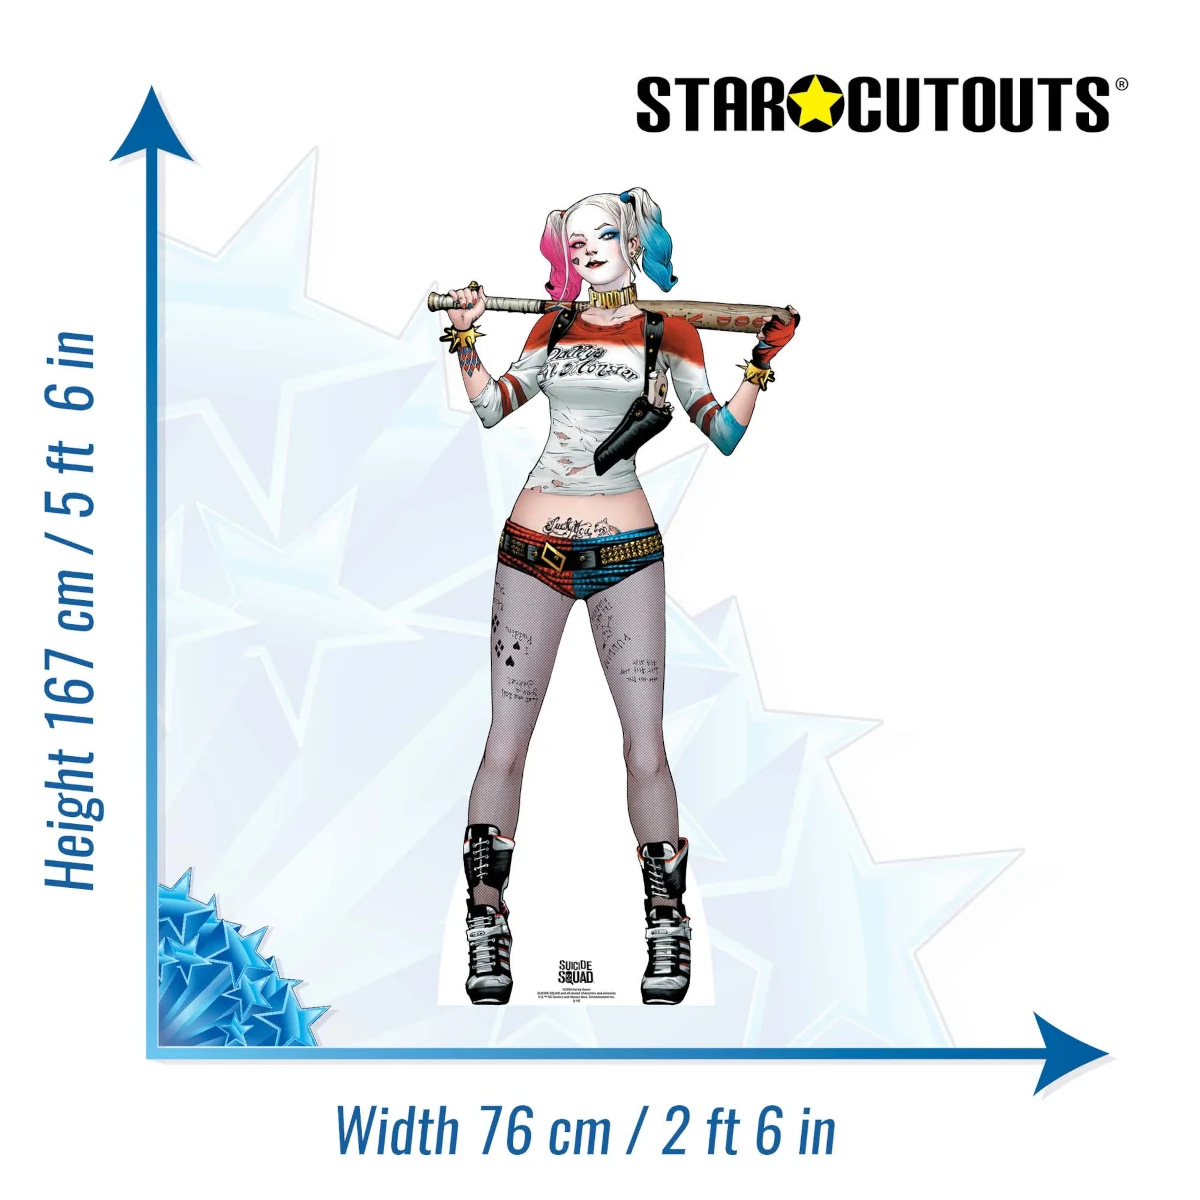 SC890 Harley Quinn 'Comic Art' (Suicide Squad) Official Lifesize Cardboard Cutout Standee Size